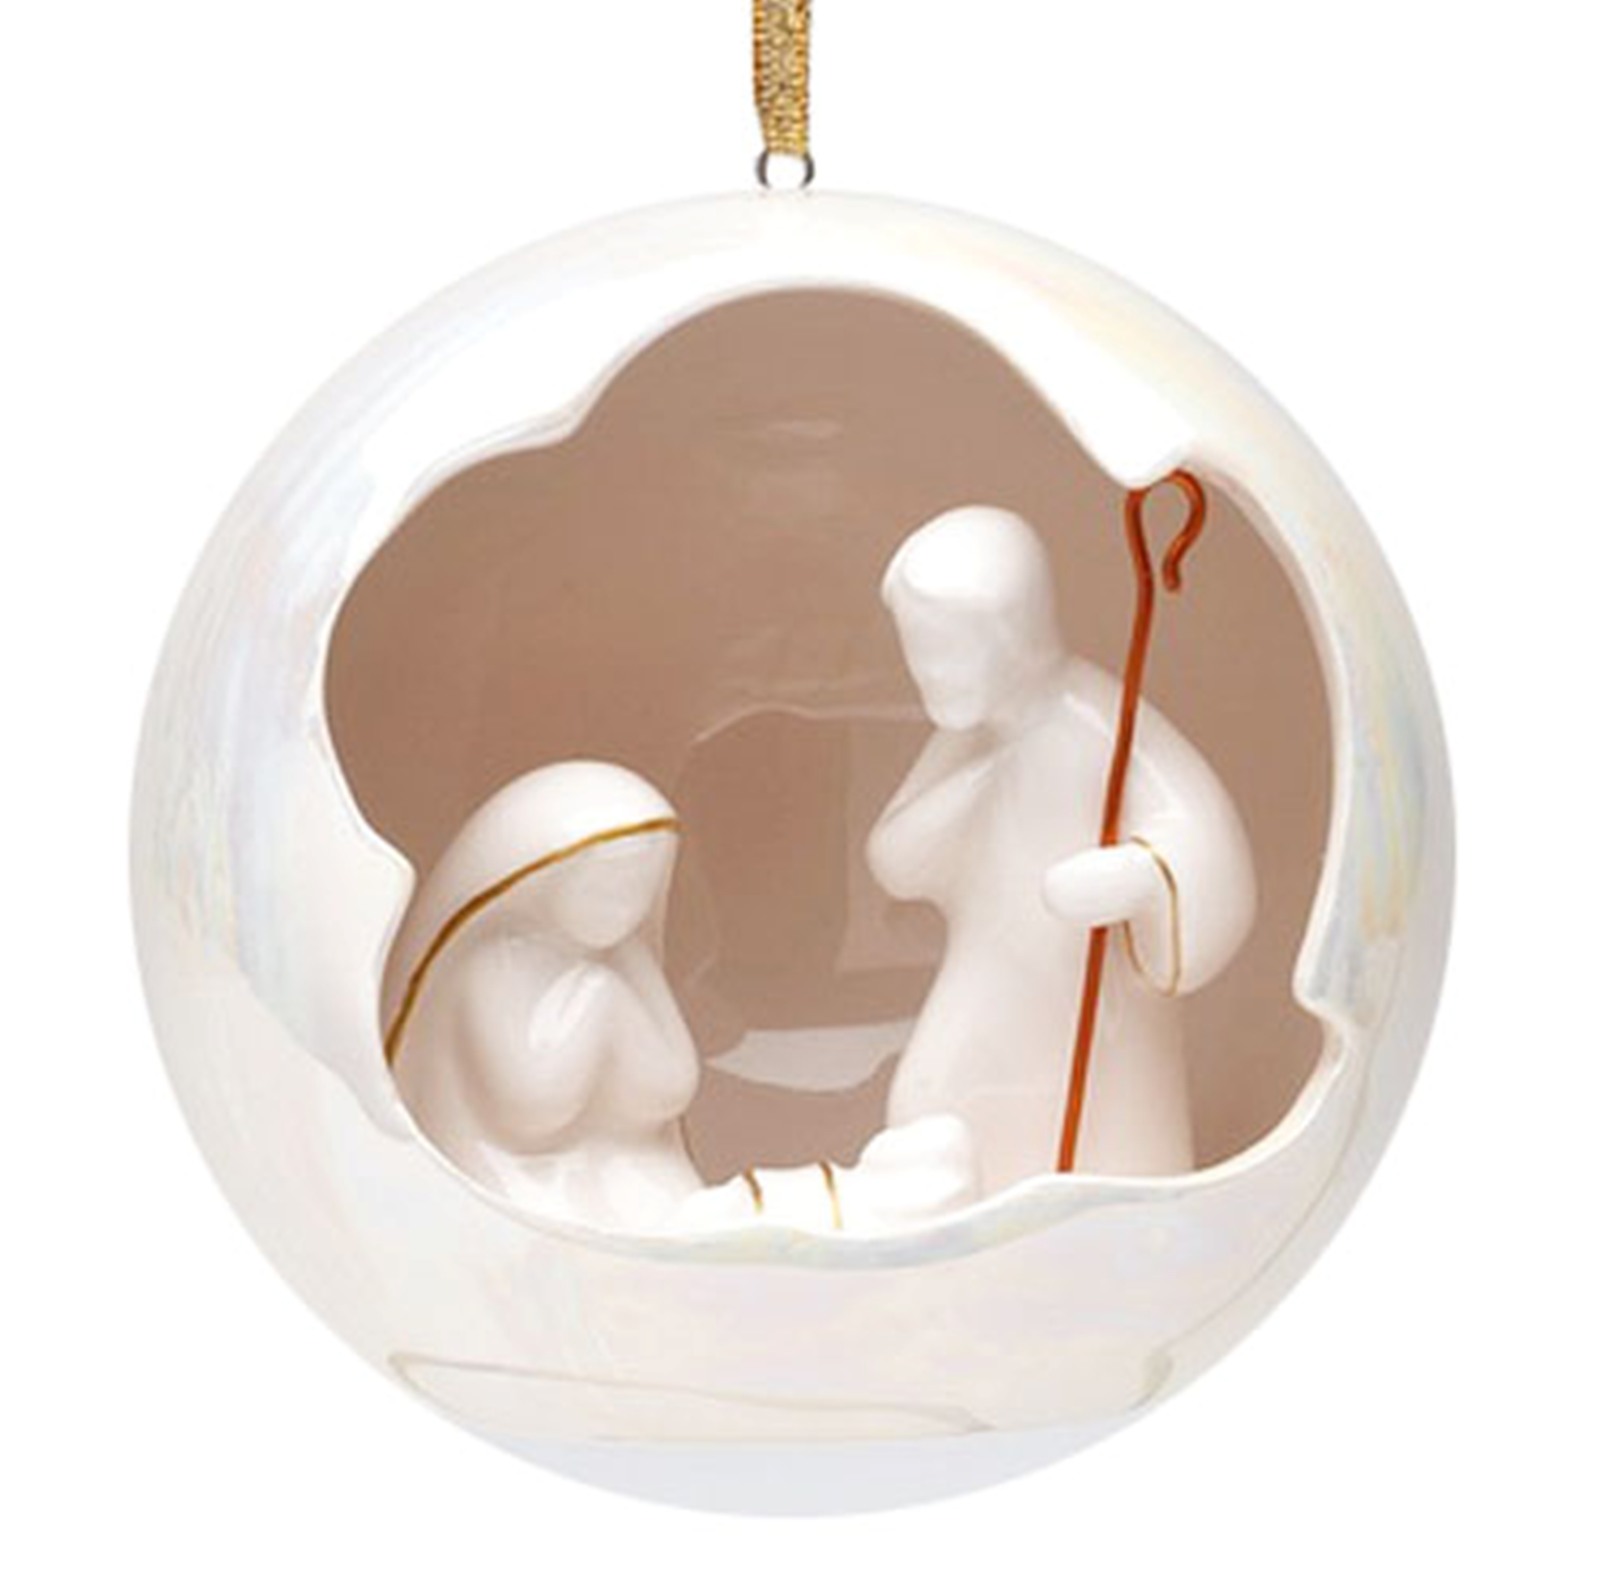 Appletree Designs Cosmos Holy Family Heavenly North Star Christmas Tree Ornament Porcelain